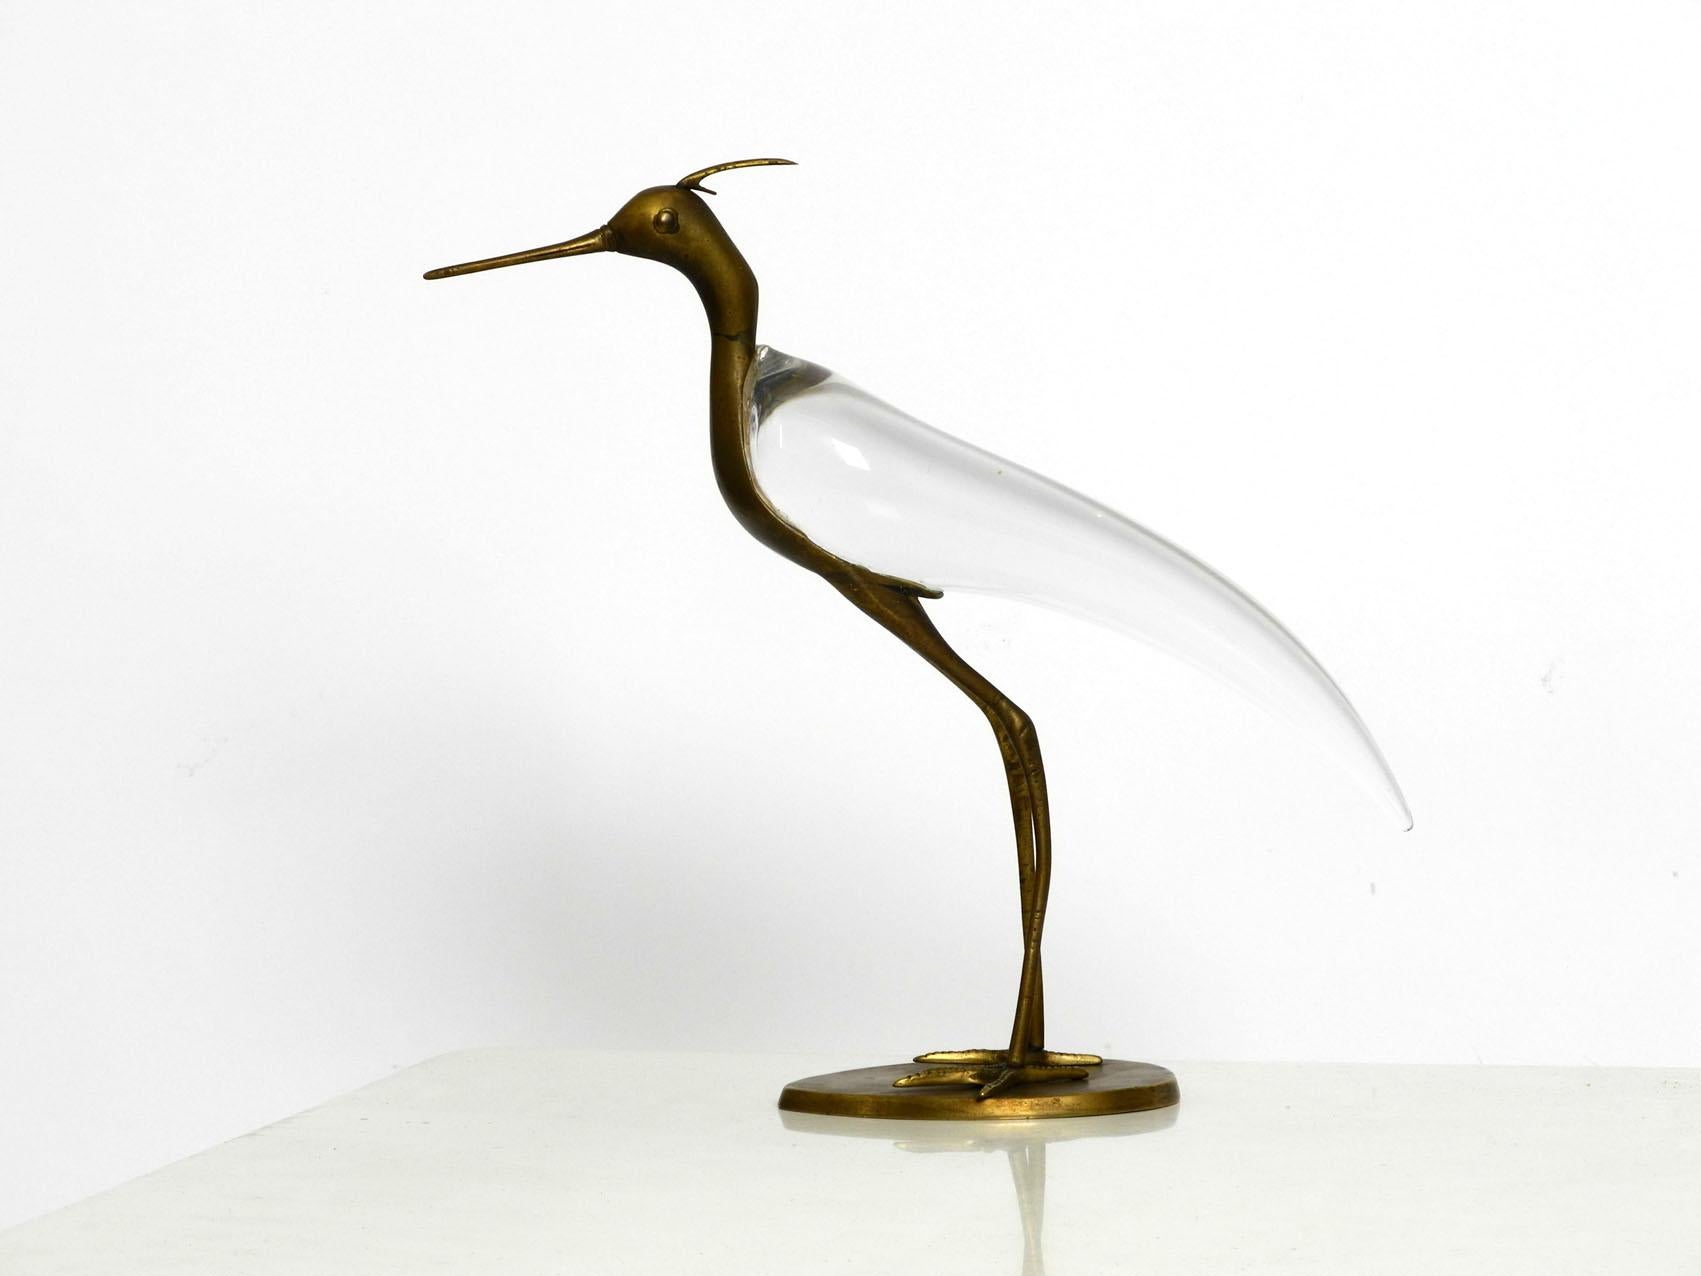 Very beautiful decorative mid century modern heron made of solid brass and with a torso made of clear glass. Designed by Luca Bojola for Licio Zanetti. Florence Italy.
Very high quality with many details.
With beautiful patina on the brass.
The